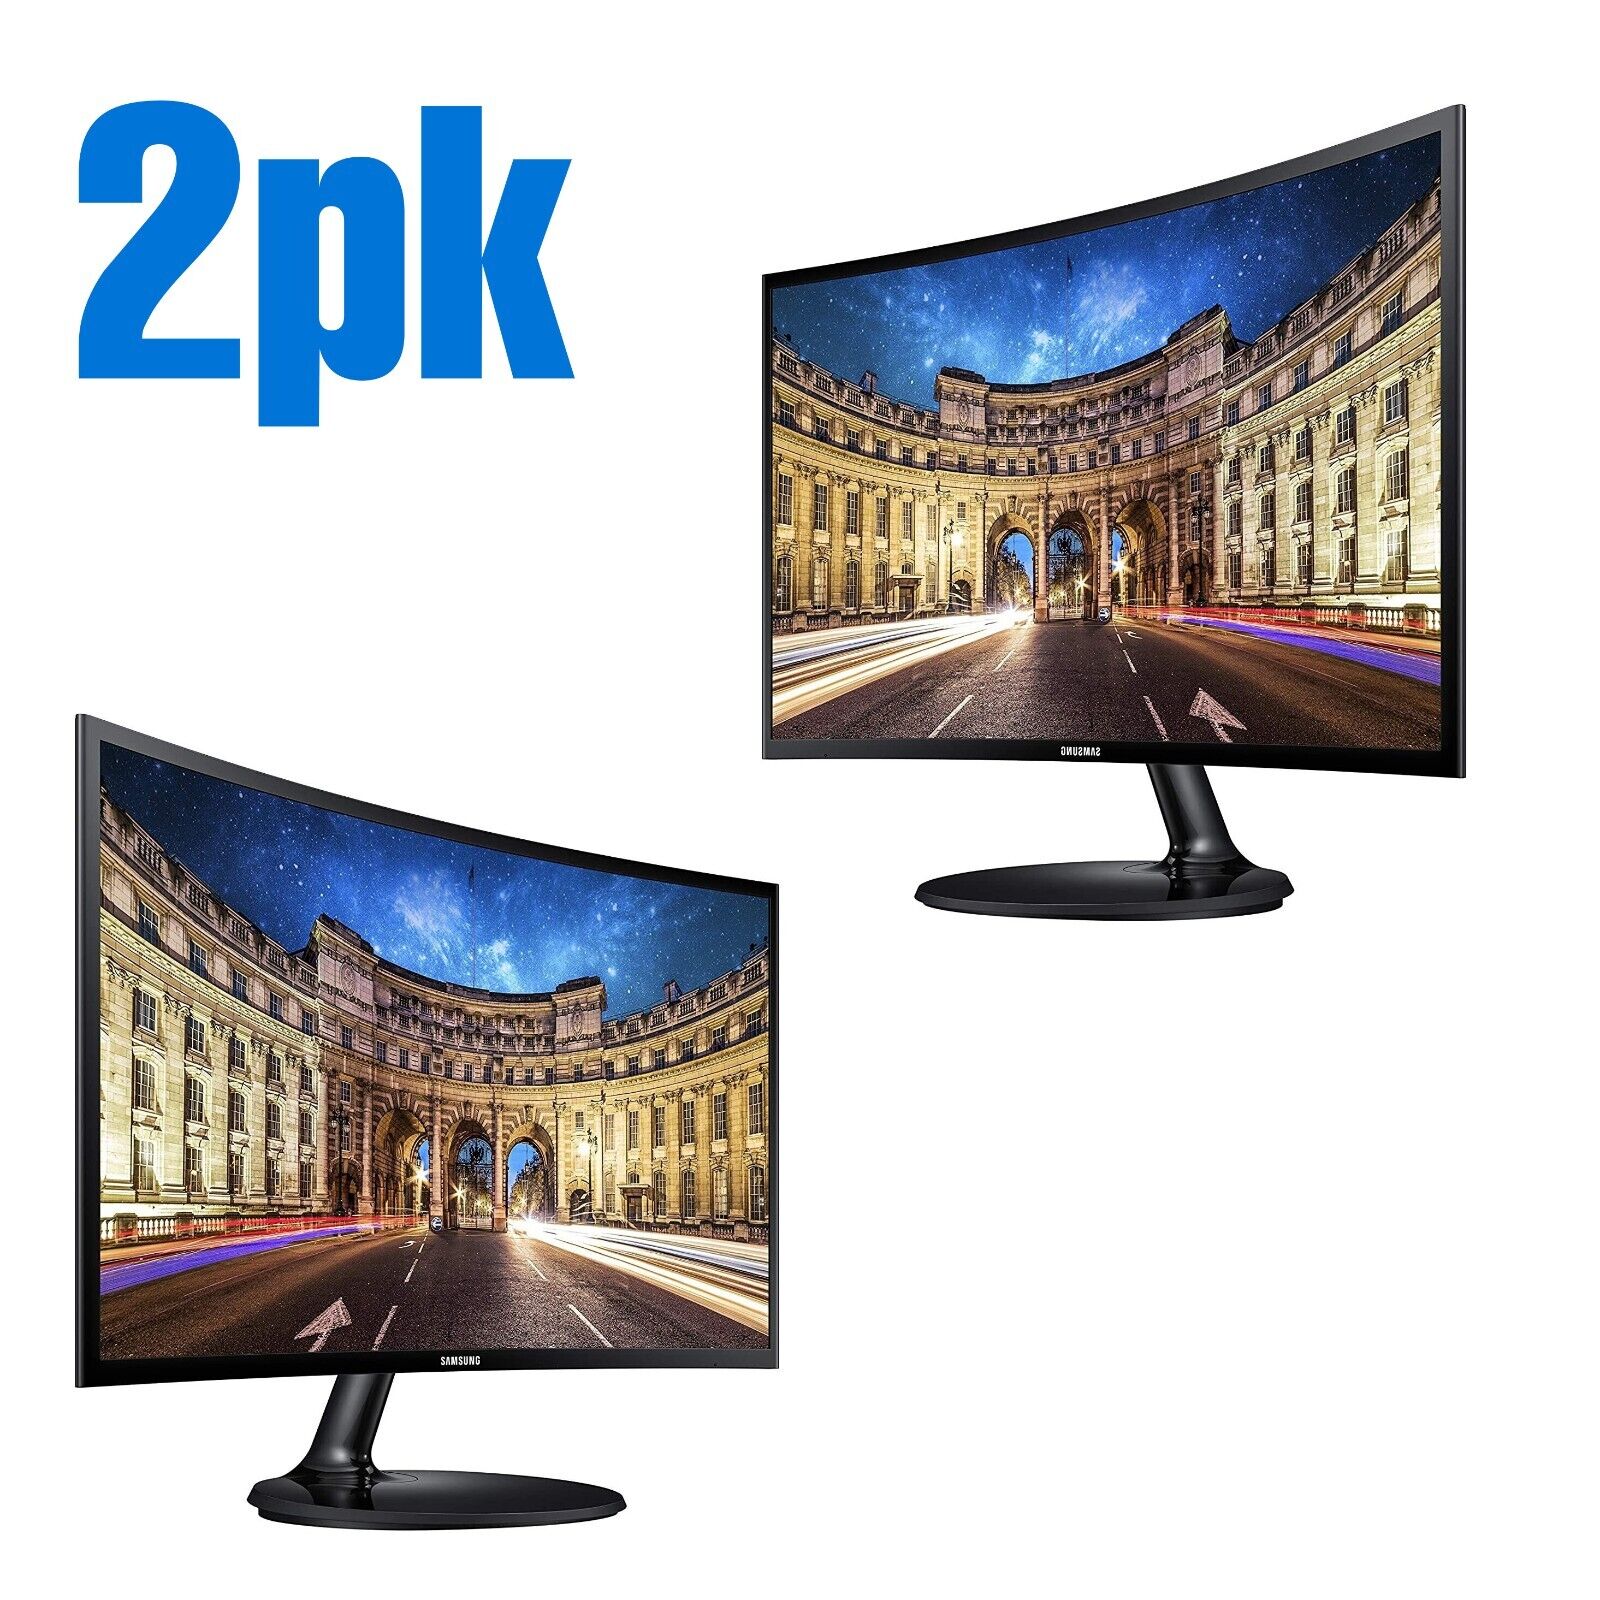 Samsung C24F390FHN CF390 Series 24 inch Curved LED Monitor - 2 PACK